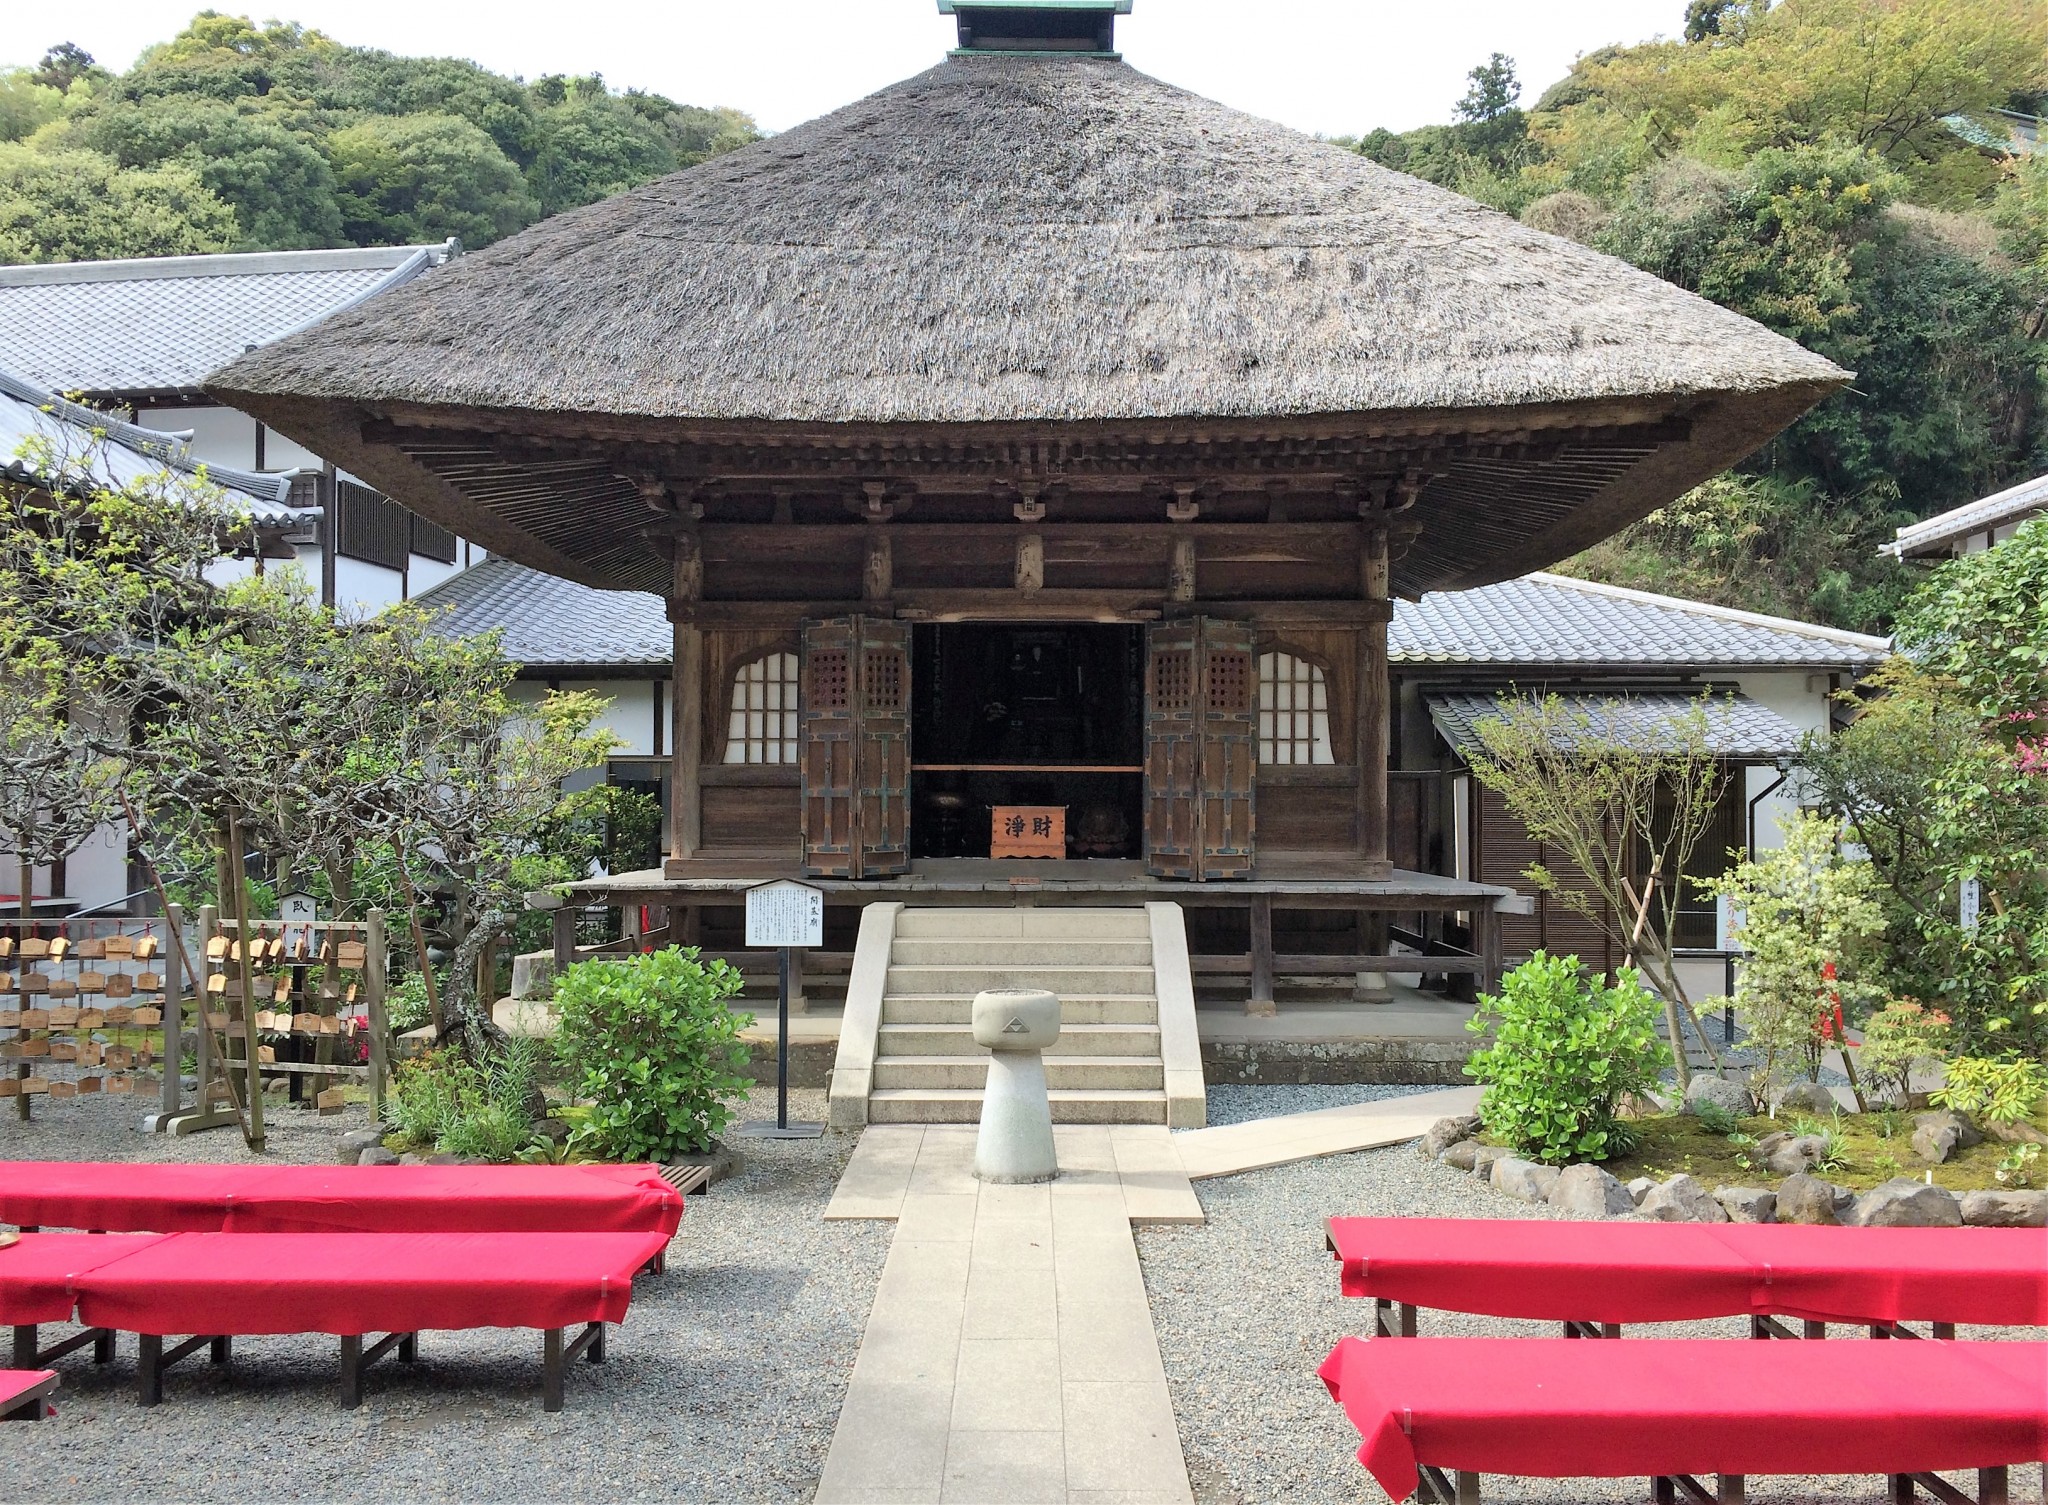 What sets Engaku-ji temple apart from other Kamakura temples?